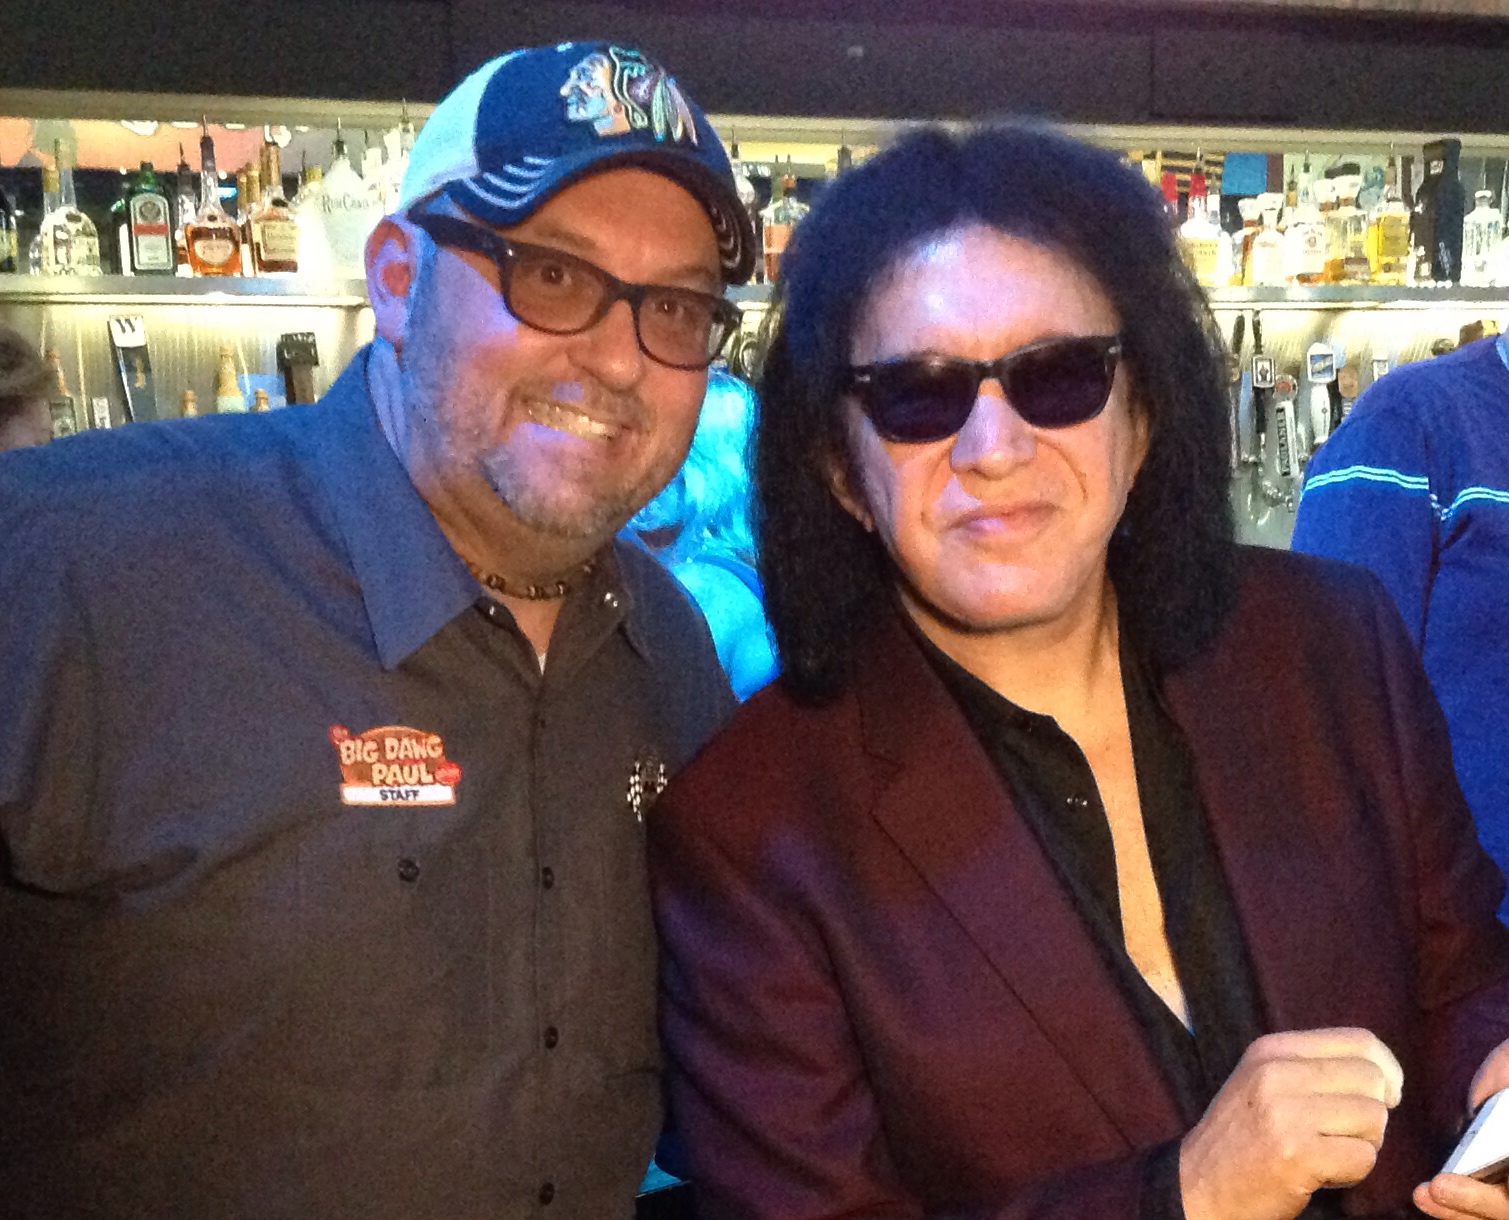 Carl Graddy and Gene Simmons of Kiss at the opening of Rock and Brews, Florida